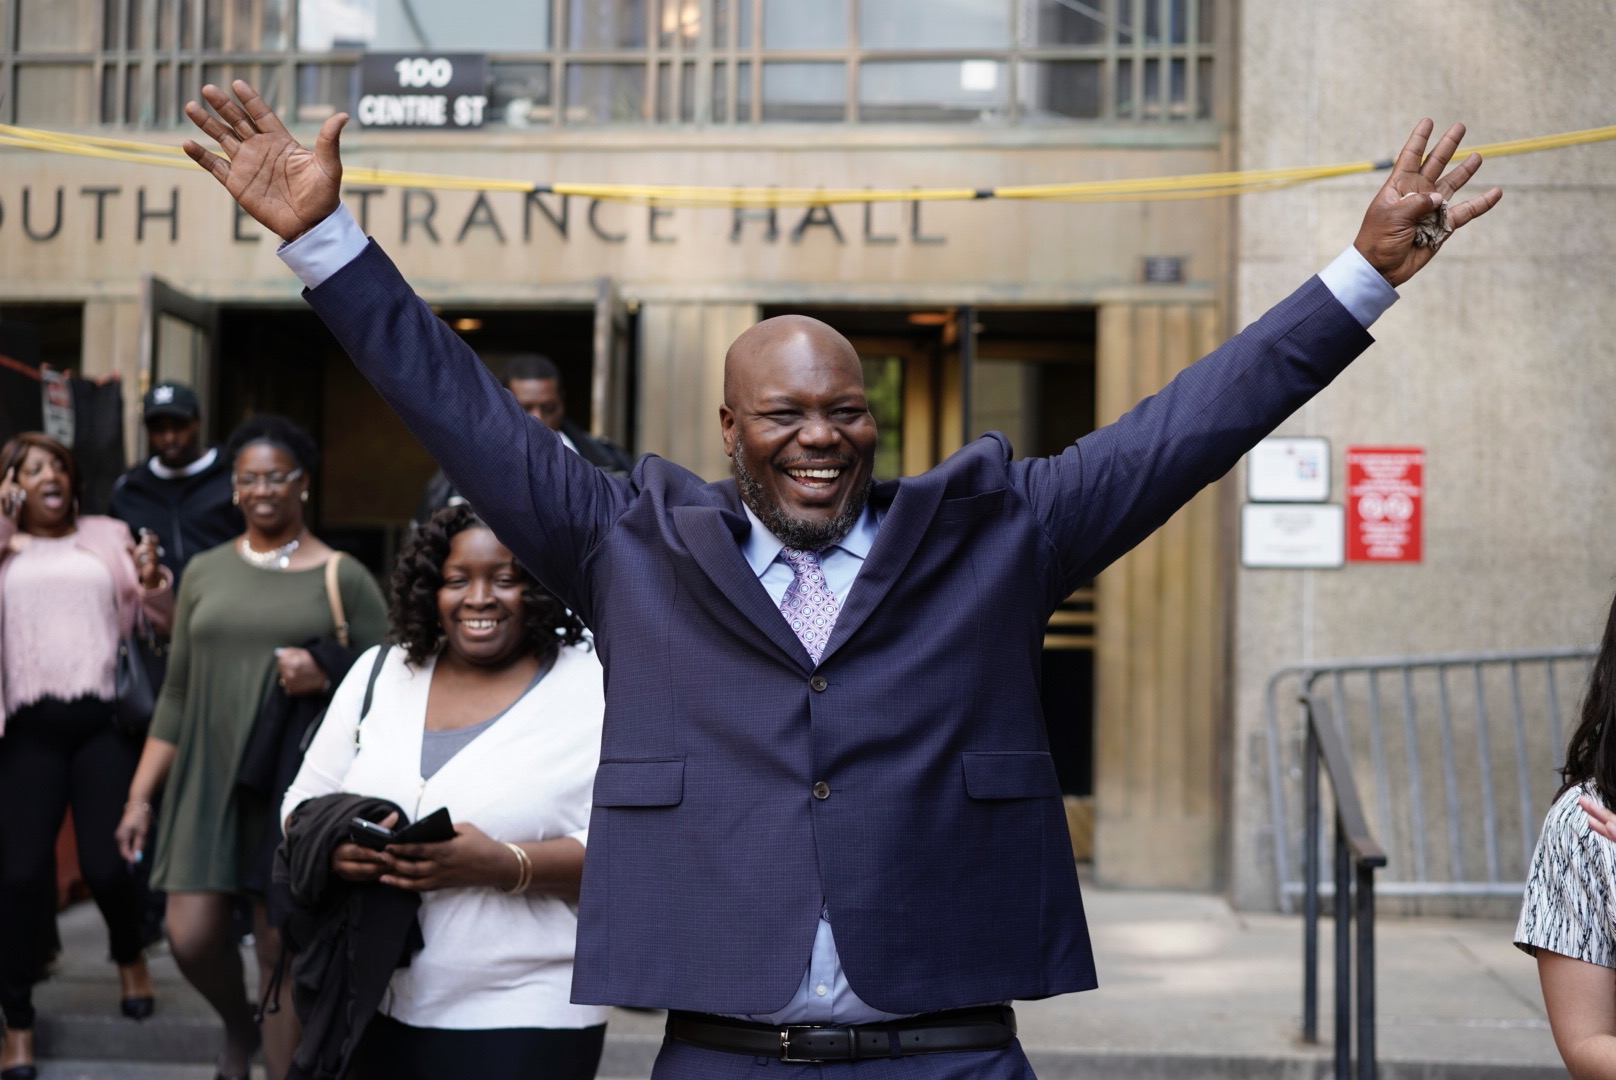 Gregory Counts moments after his exoneration on May 7, 2018 in New York City. Photo by Sameer Abdel-Khalek.